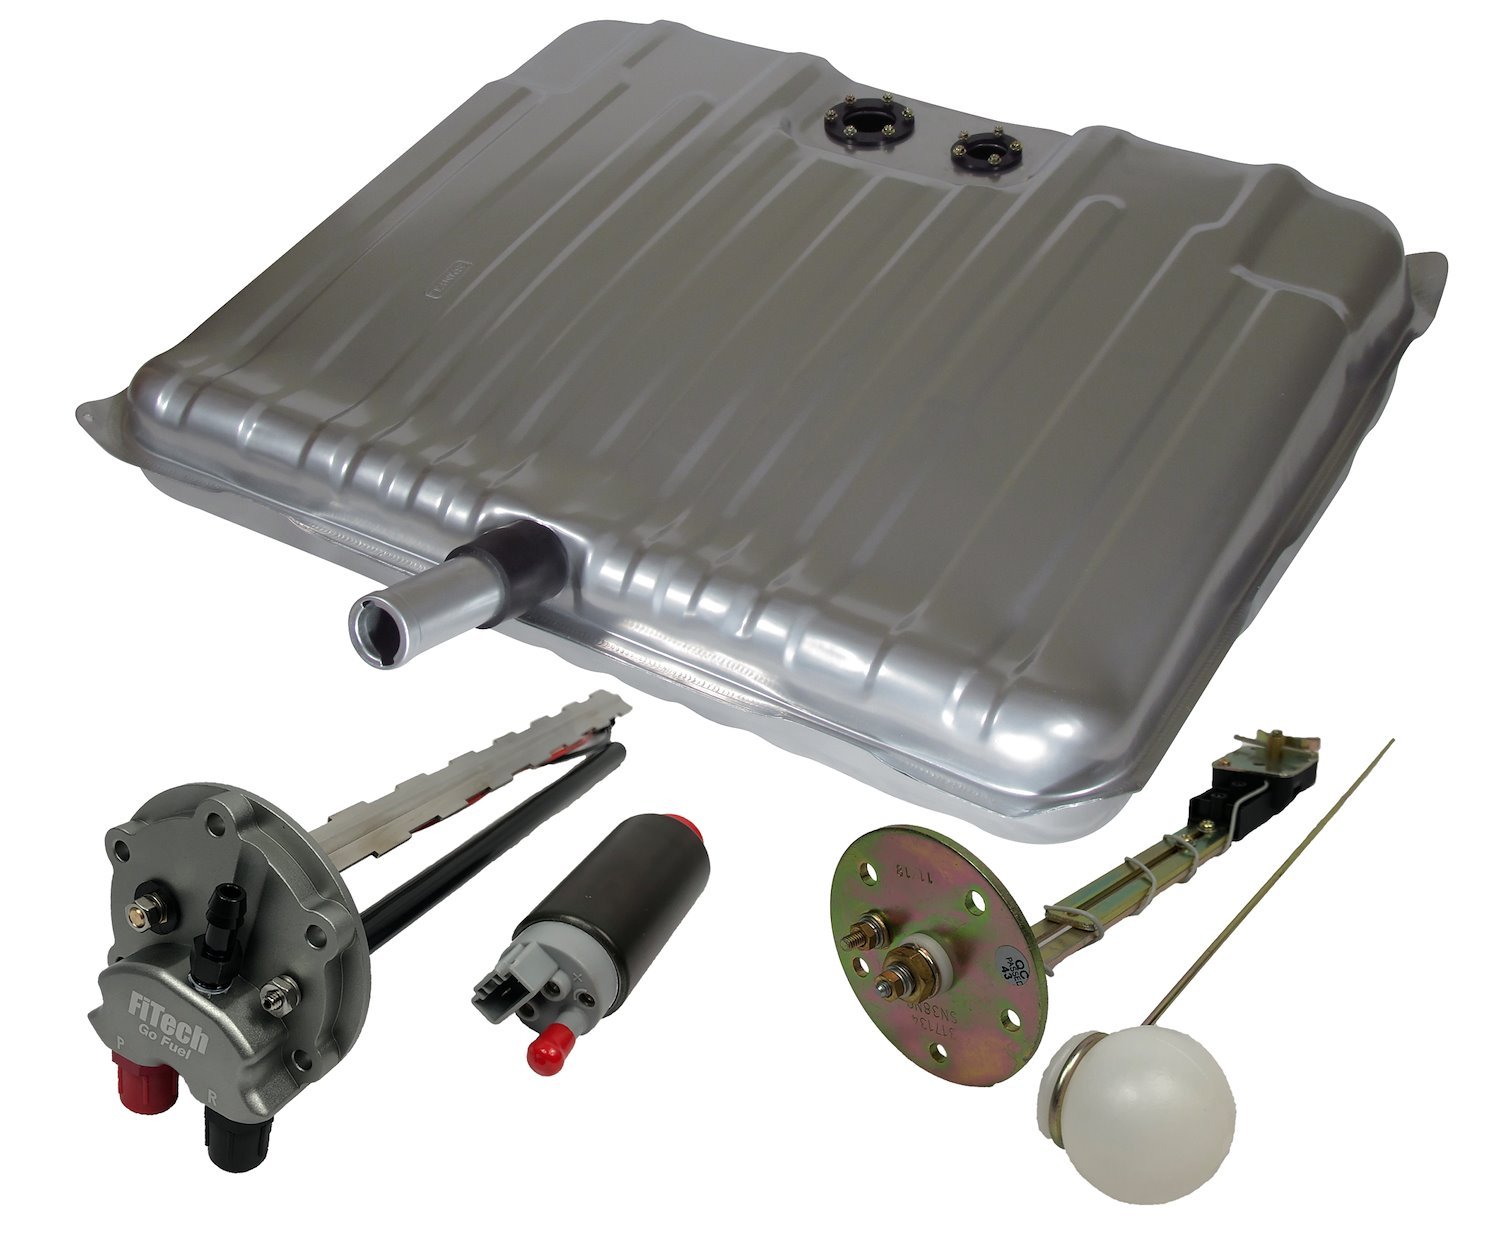 Fuel Tank Kit for Impala, Biscayne, and Bel Air